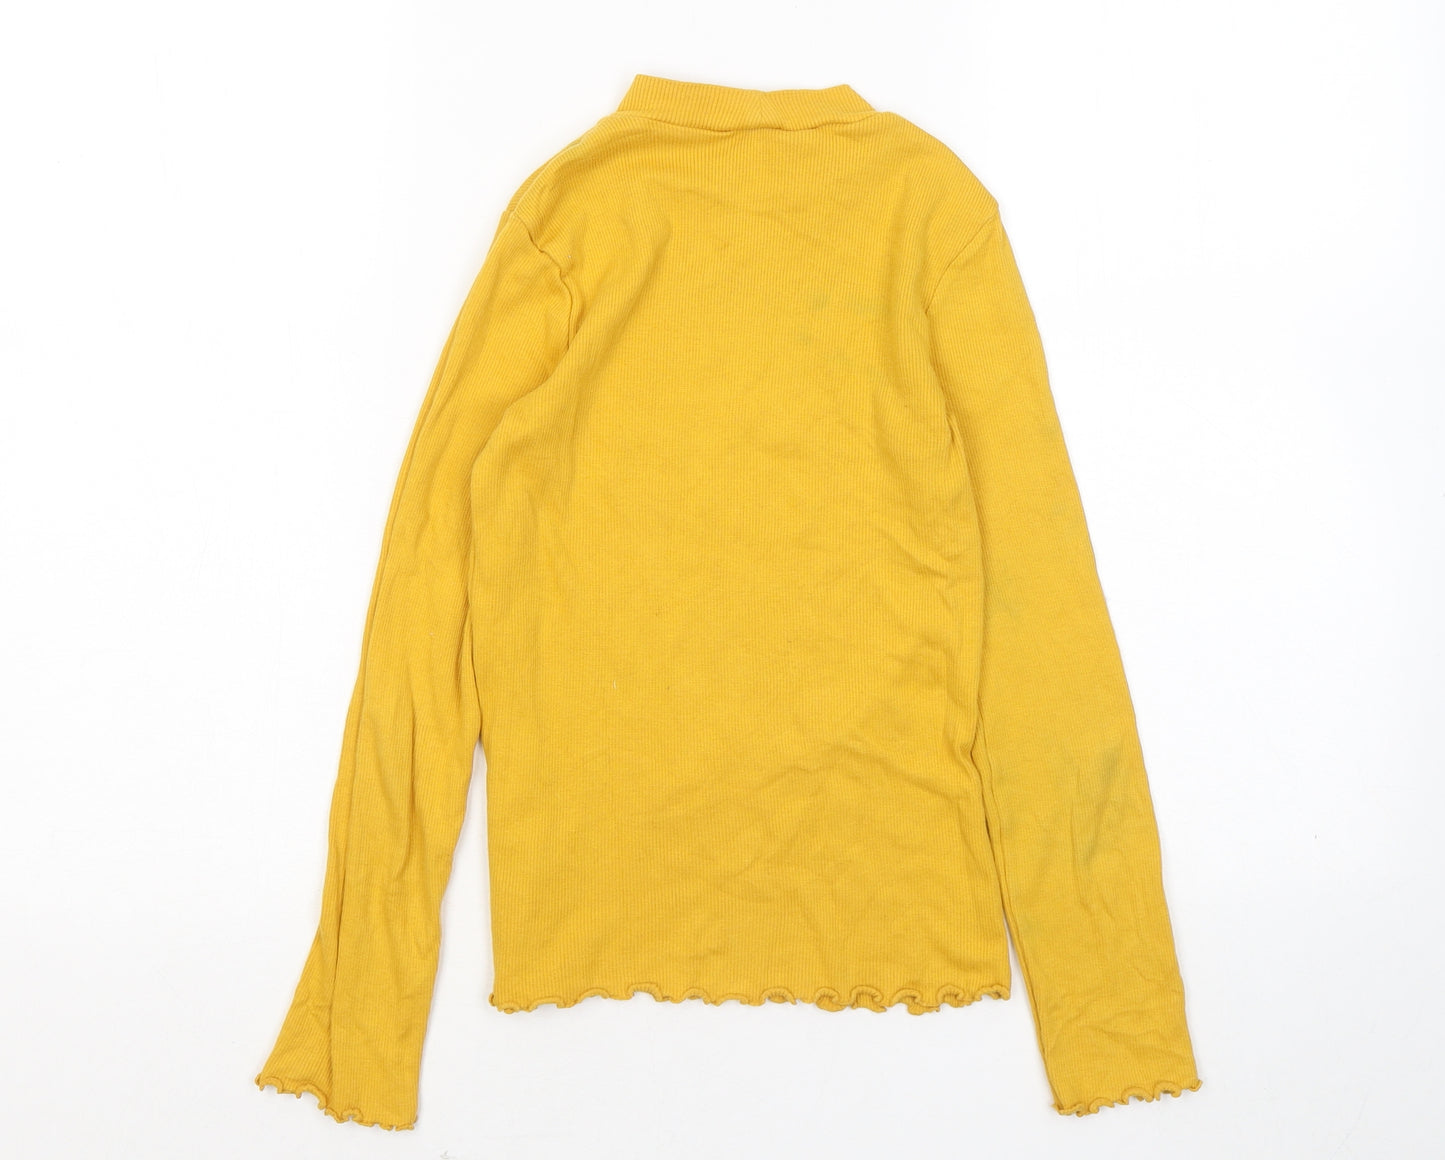 F&F Girls Yellow Mock Neck Cotton Pullover Jumper Size 10-11 Years